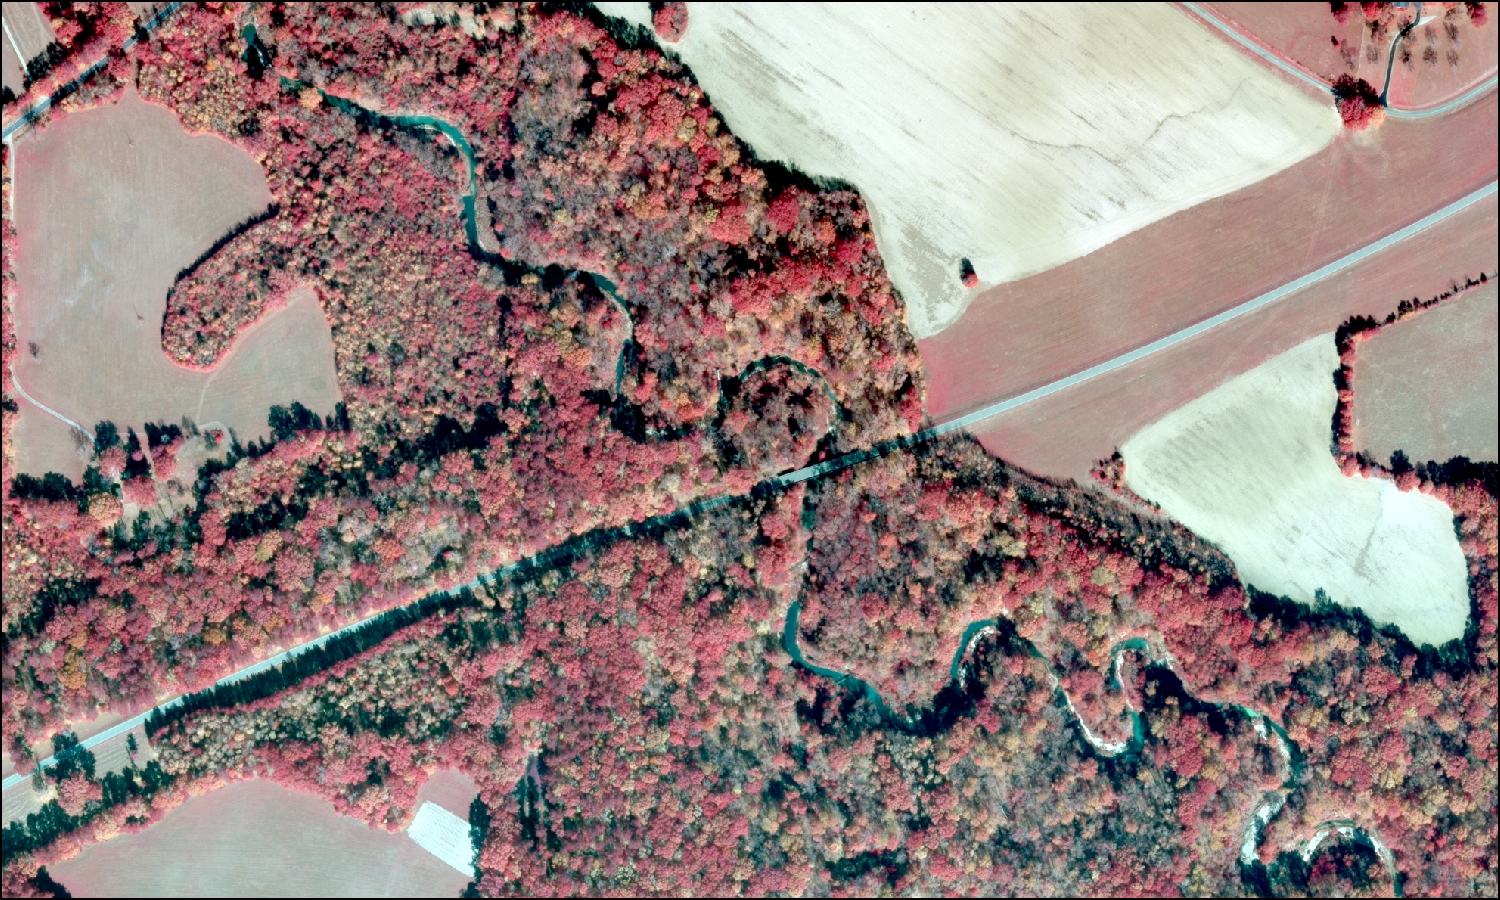 Color infrared photograph of the Natchez Trace Parkway as it crosses Fivemile Creek between Jackson and Natchez, Mississippi, showing a diversity of forests in a working agricultural landscape.